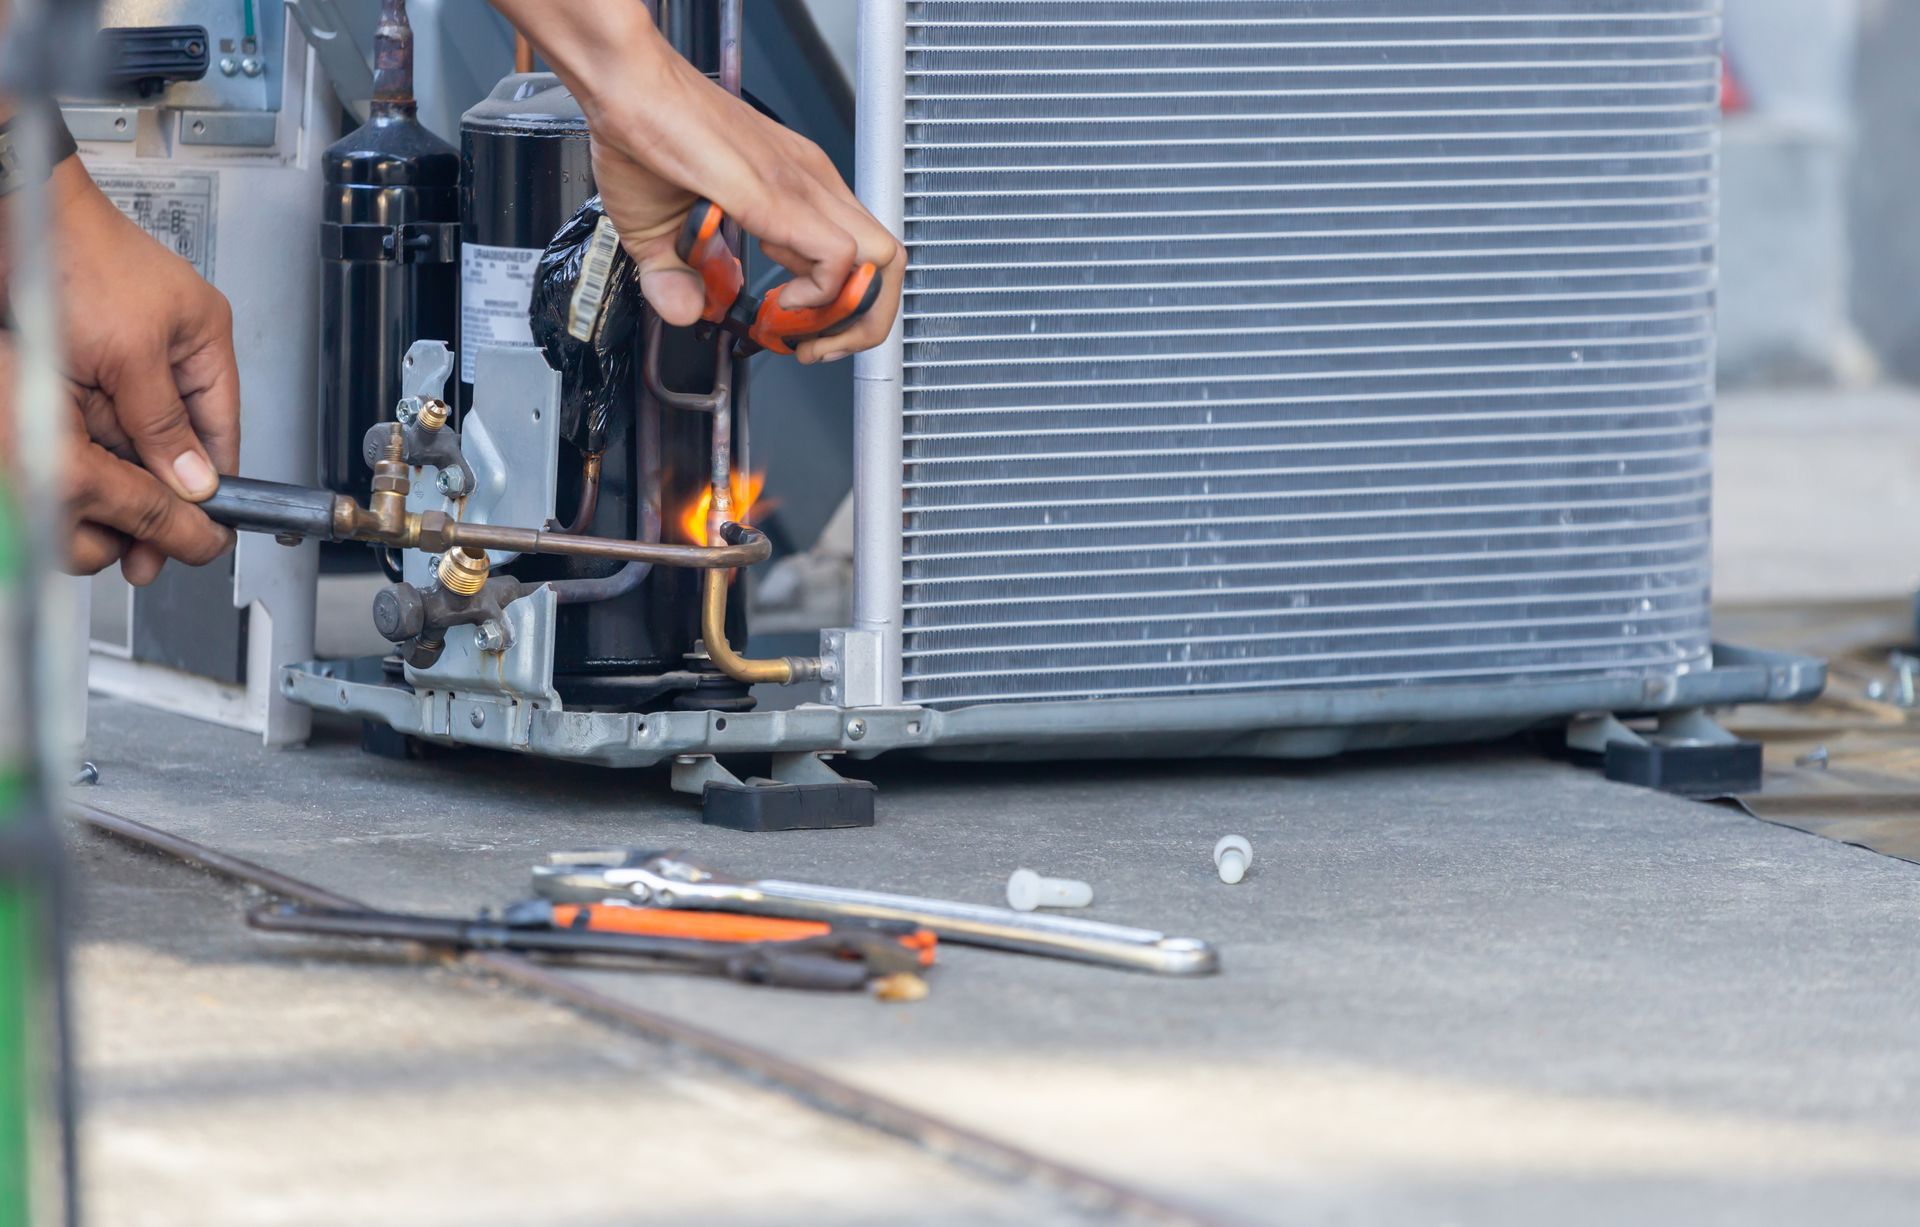 A skilled air conditioning repairman, equipped with fuel gases and oxygen for welding and cutting metals, performing maintenance on an air conditioning system.